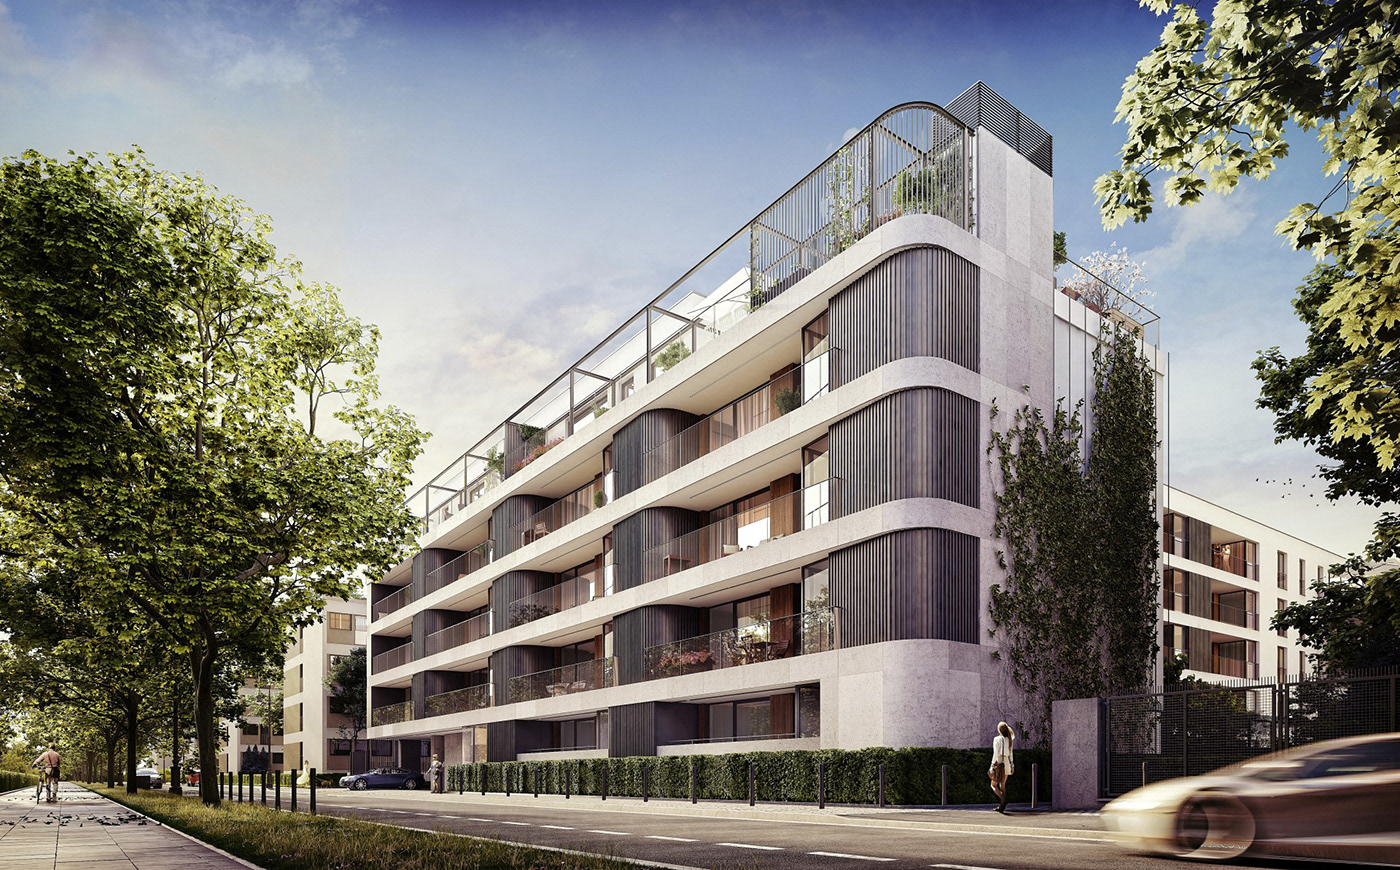 3ds max V-ray vray archviz architecture Residencial apartment building rendering warsaw visualization